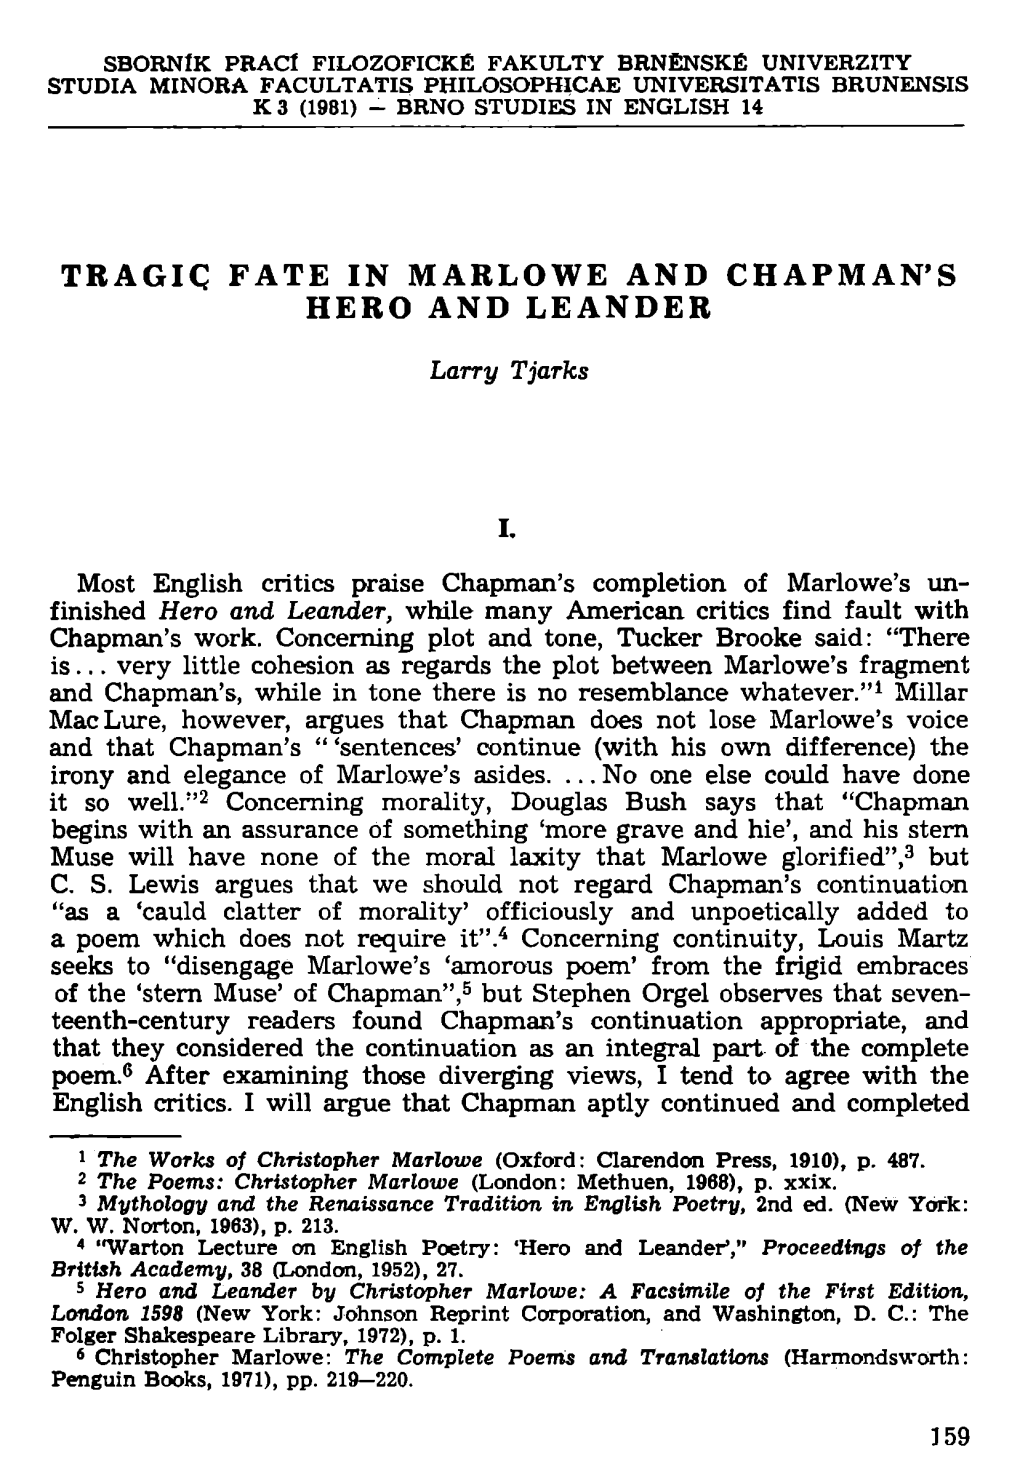 Tragiq Fate in Marlowe and Chapman's Hero and Leander